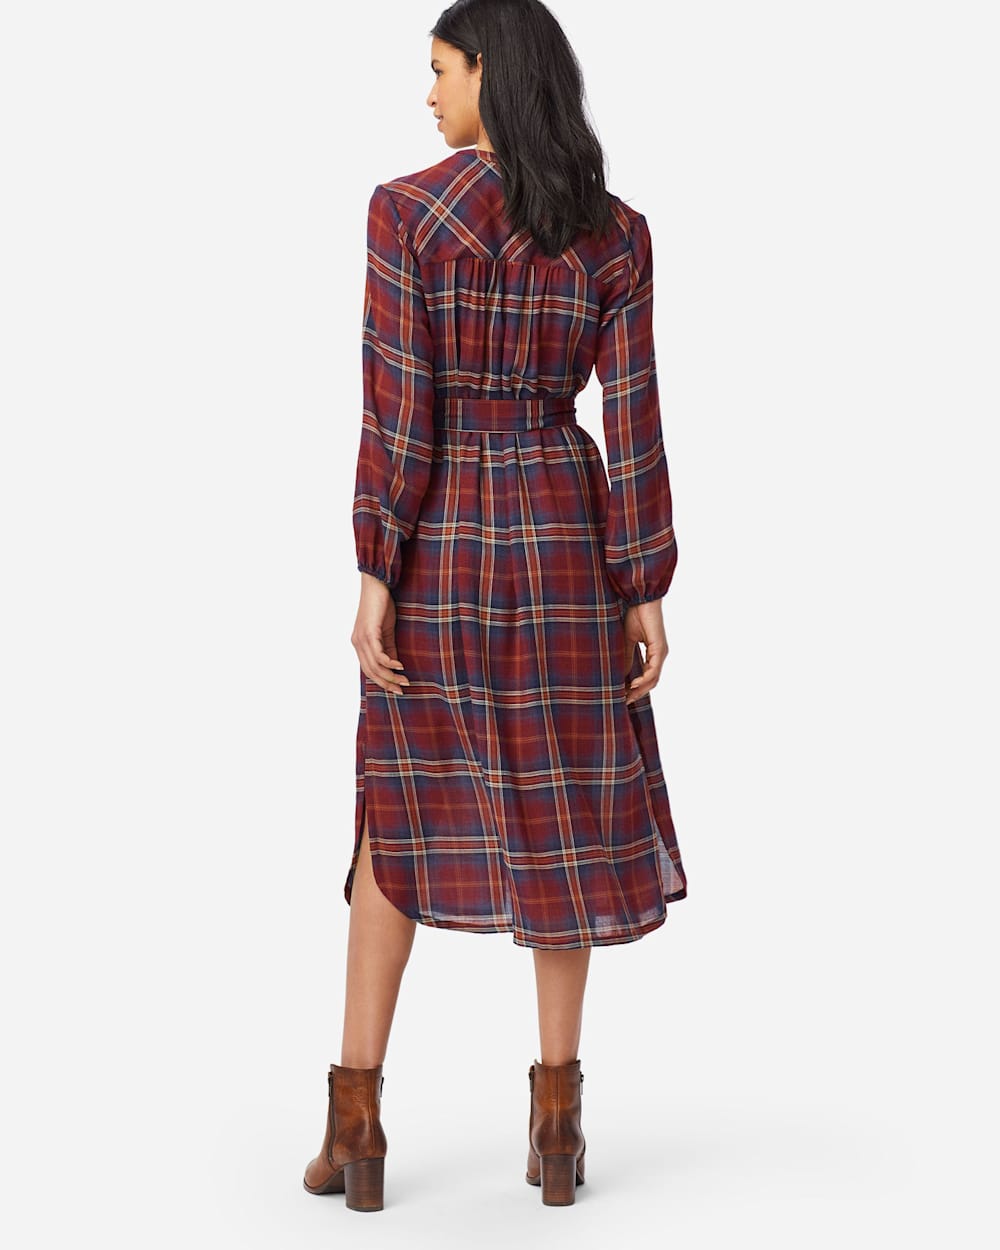 ALTERNATE VIEW OF BUTTON-FRONT PLAID DRESS IN RUST PLAID image number 3